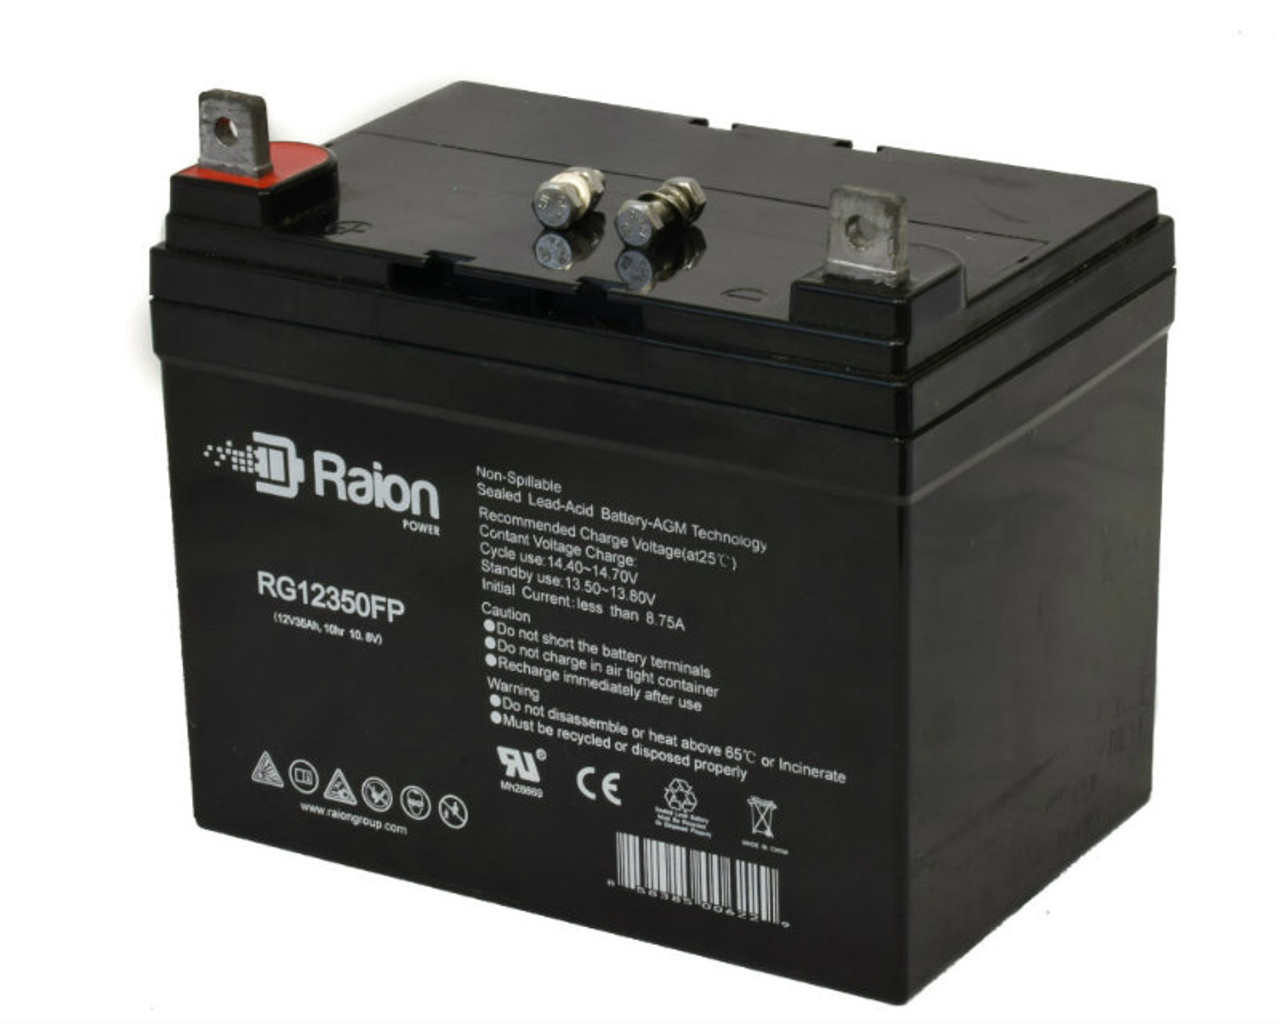 Raion Power Replacement 12V 35Ah RG12350FP Mobility Scooter Battery for Golden Technologies BuzzAround 3 Wheel